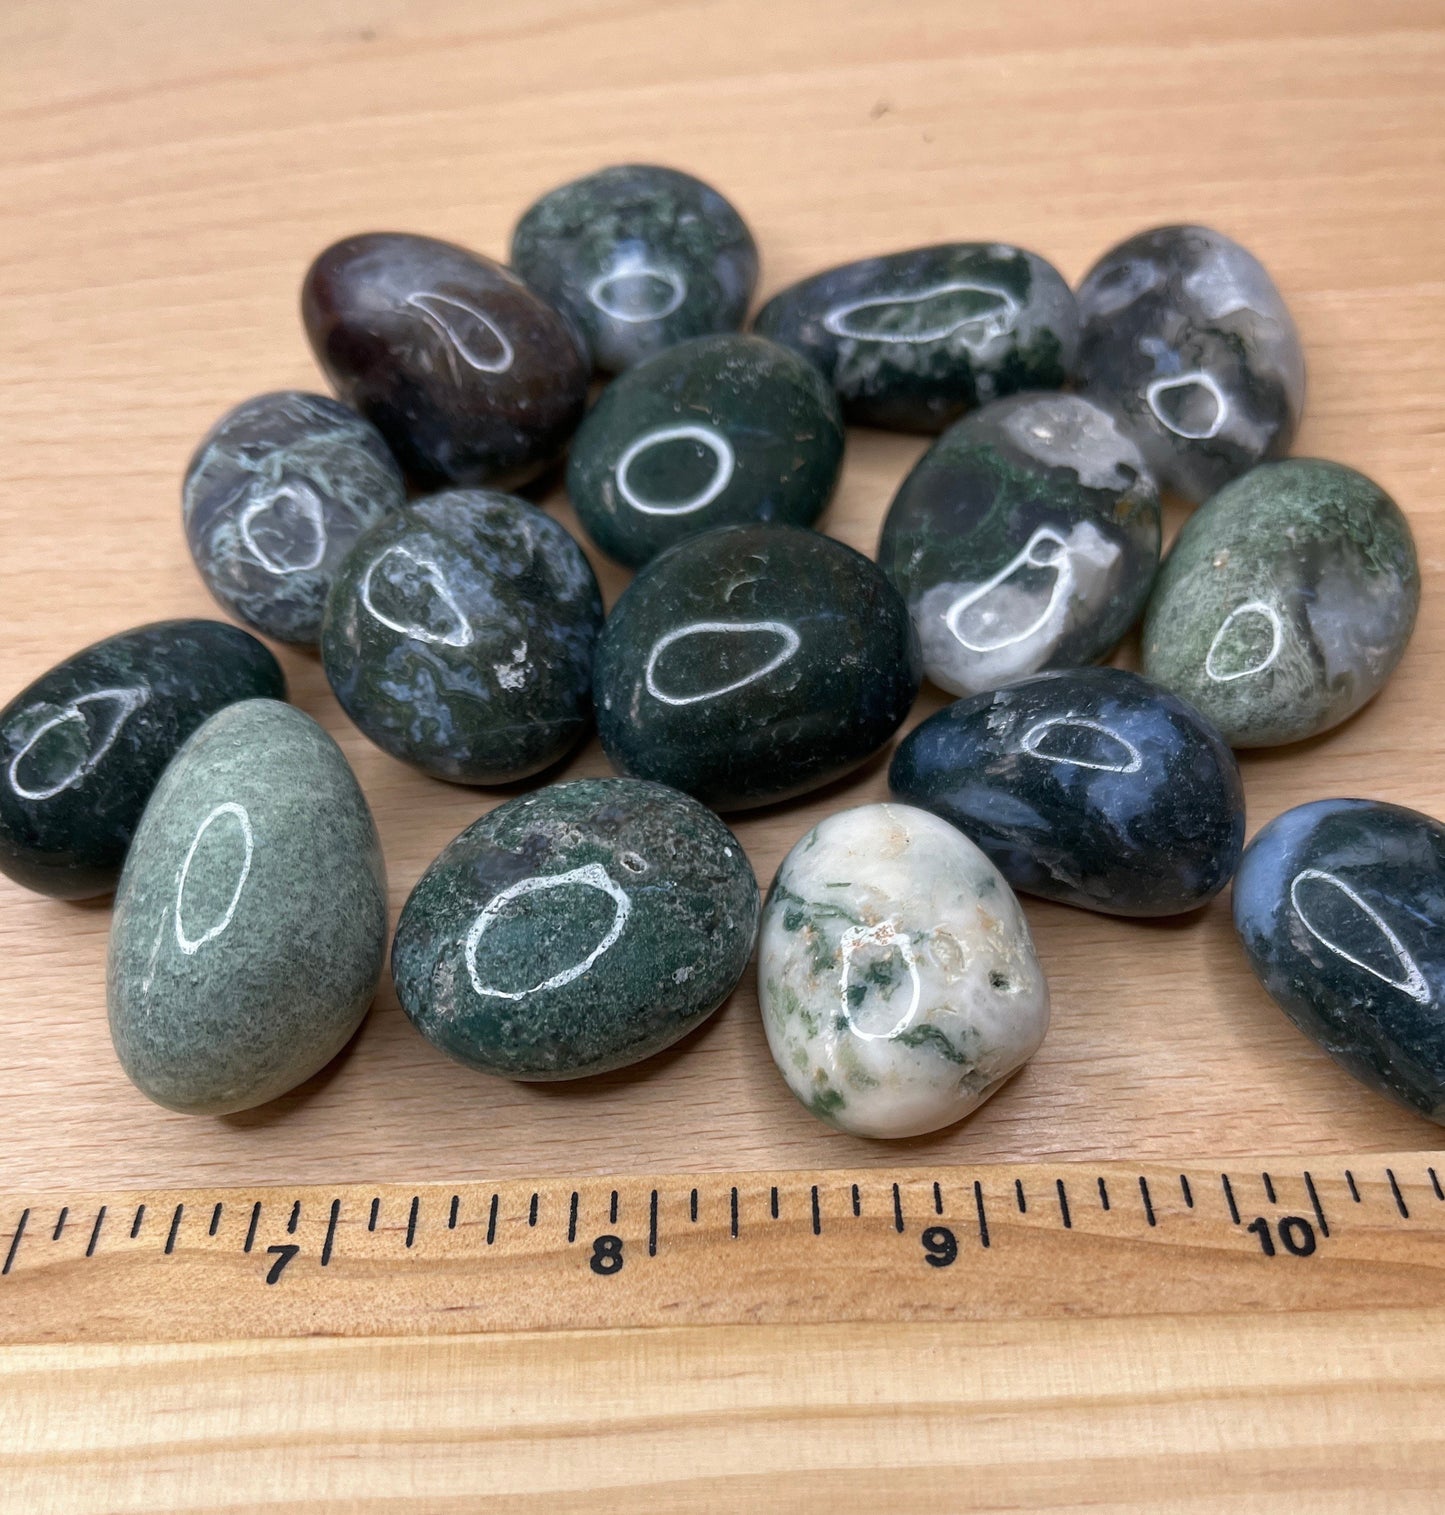 Tree Agate Tumbled Stone 0629 Approx. 1 1/4”- 1 3/4”